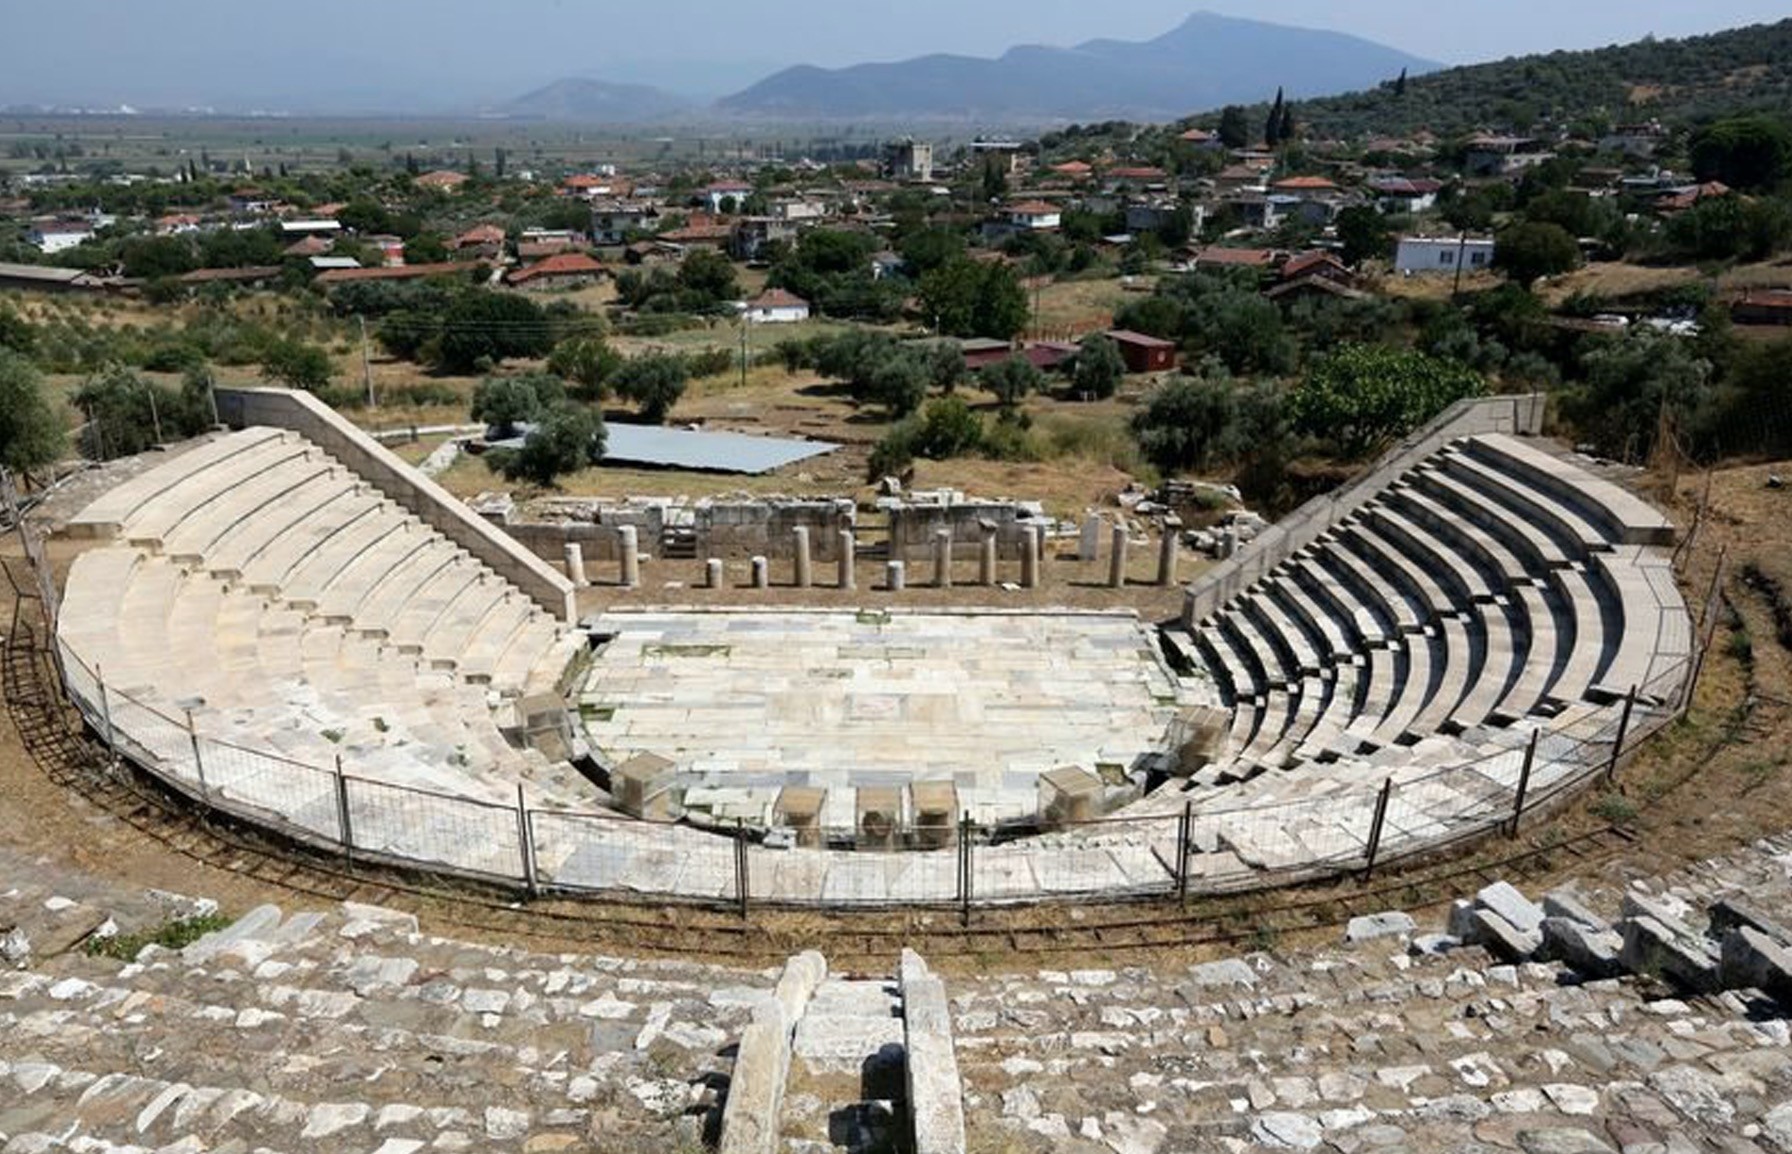 The Hellenistic theater in the Metropolis.